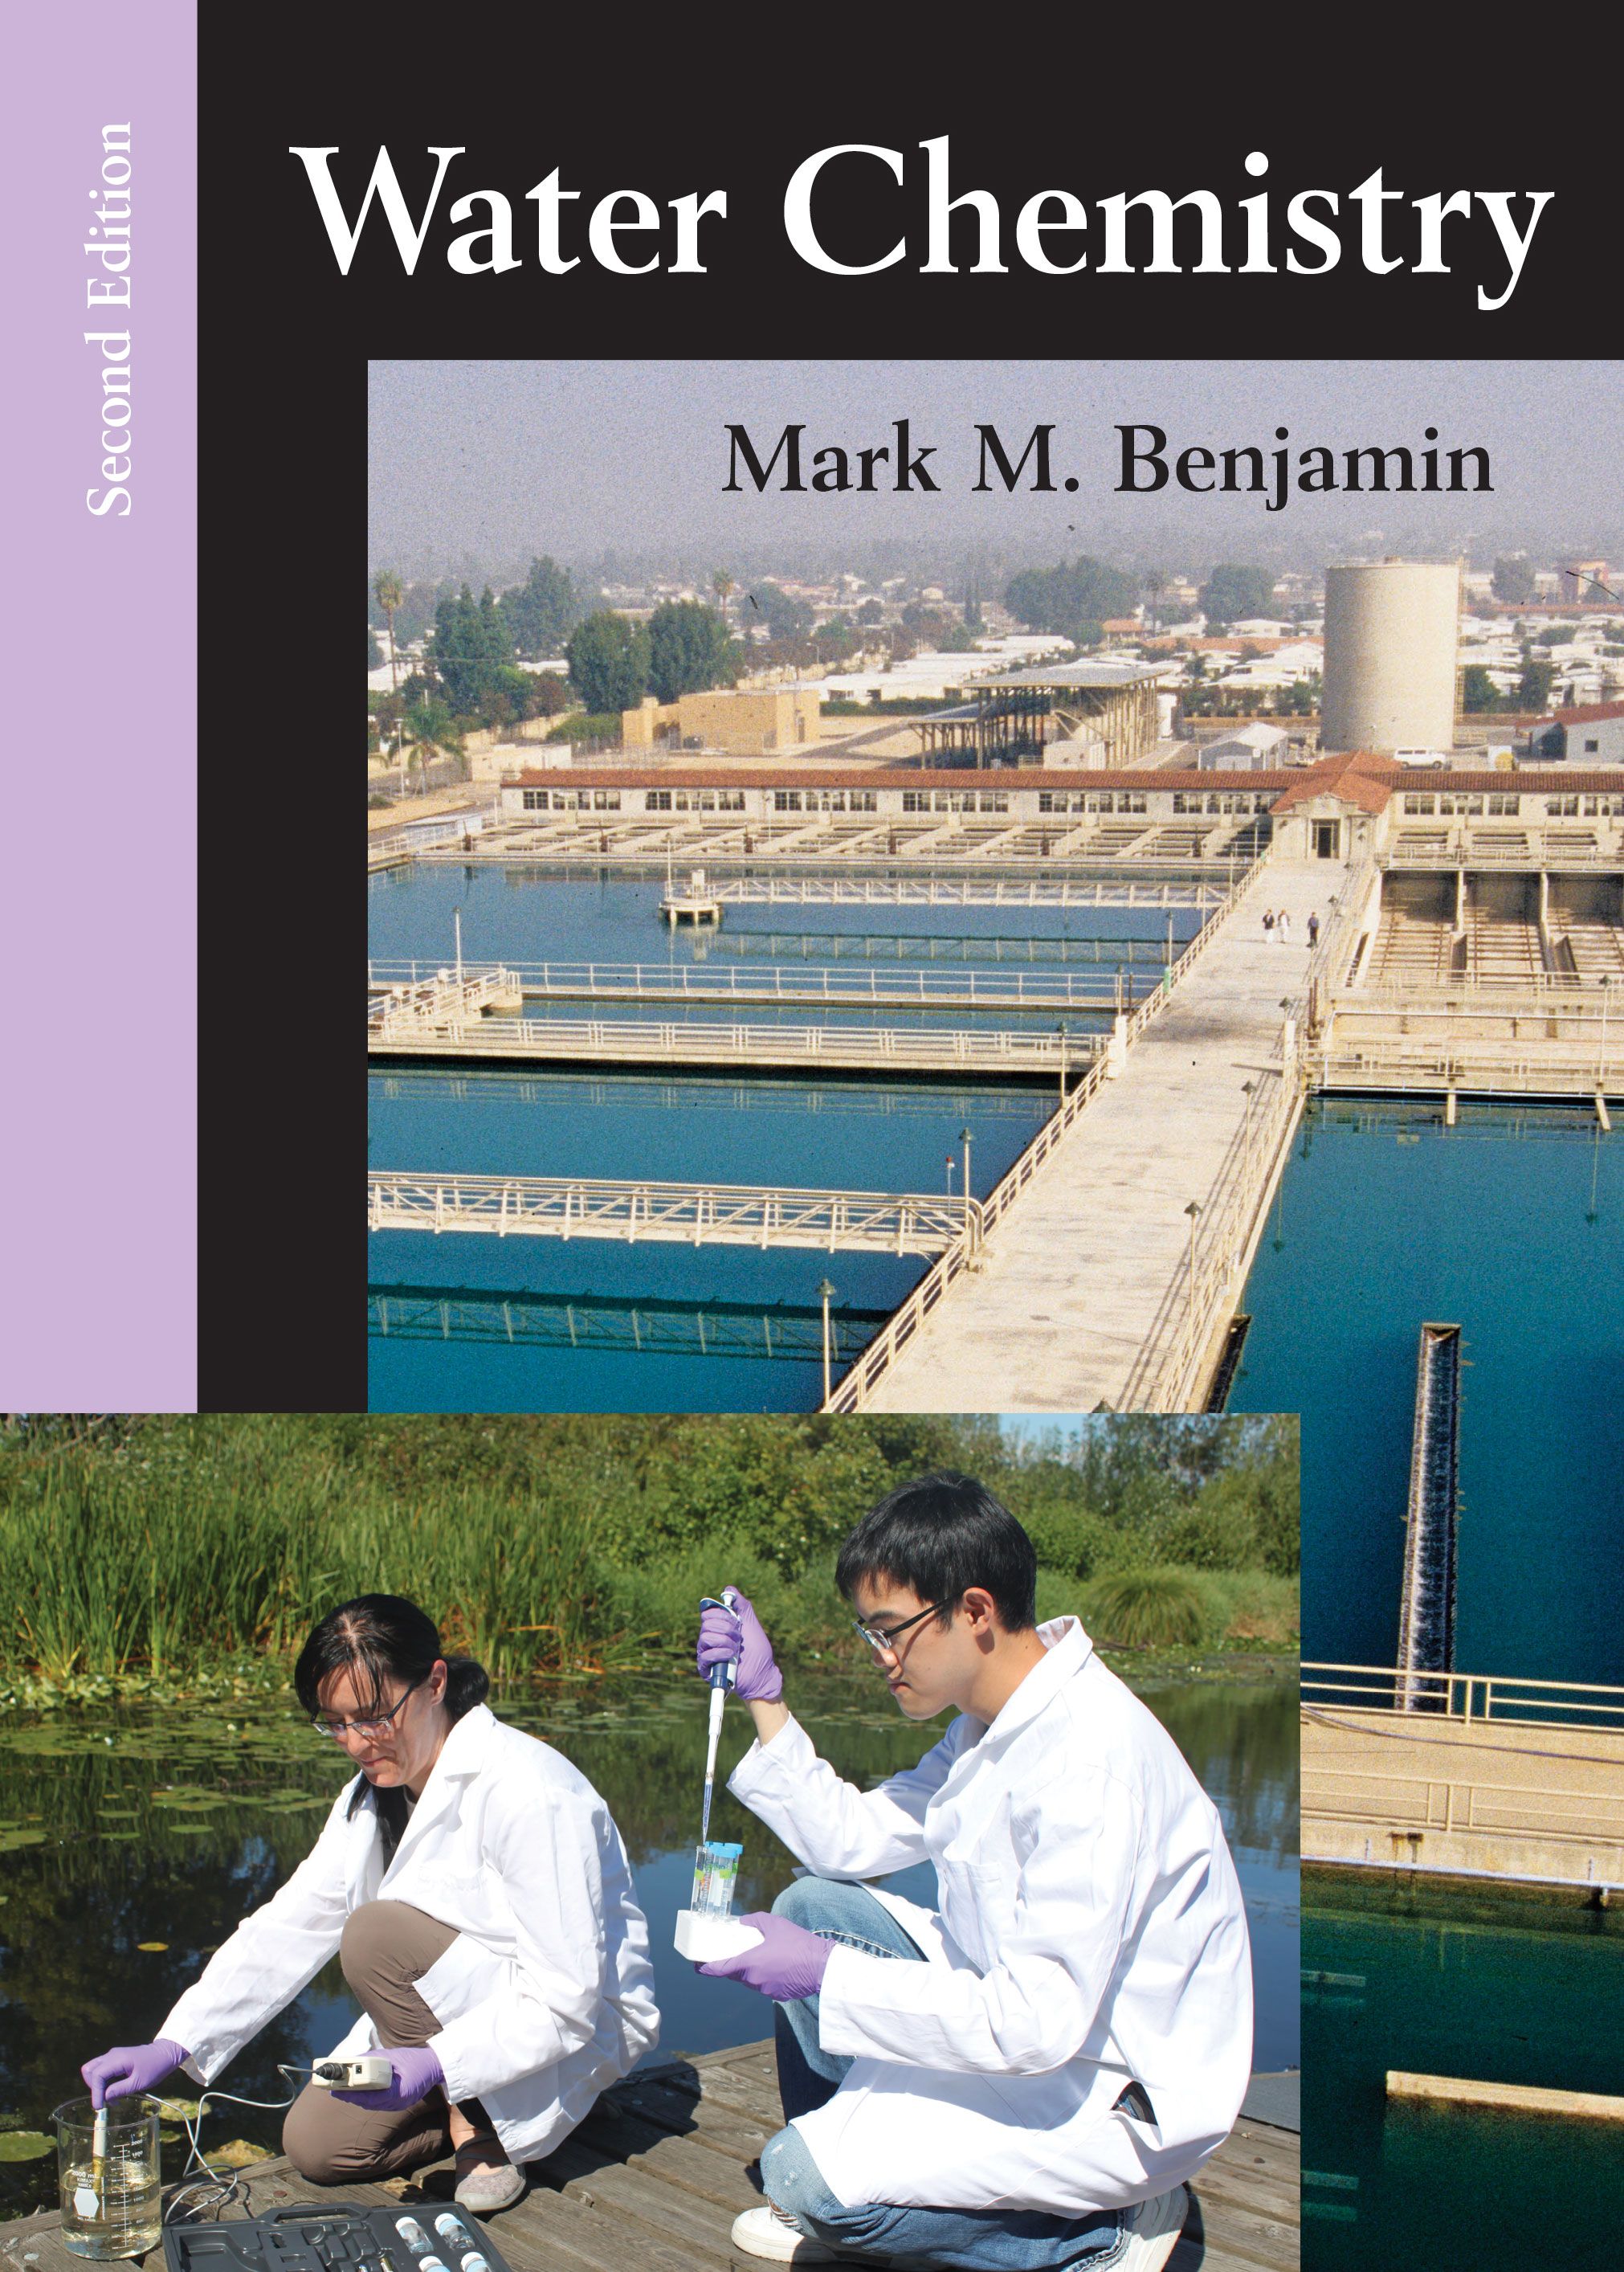 Water Chemistry: Second Edition by Mark M. Benjamin